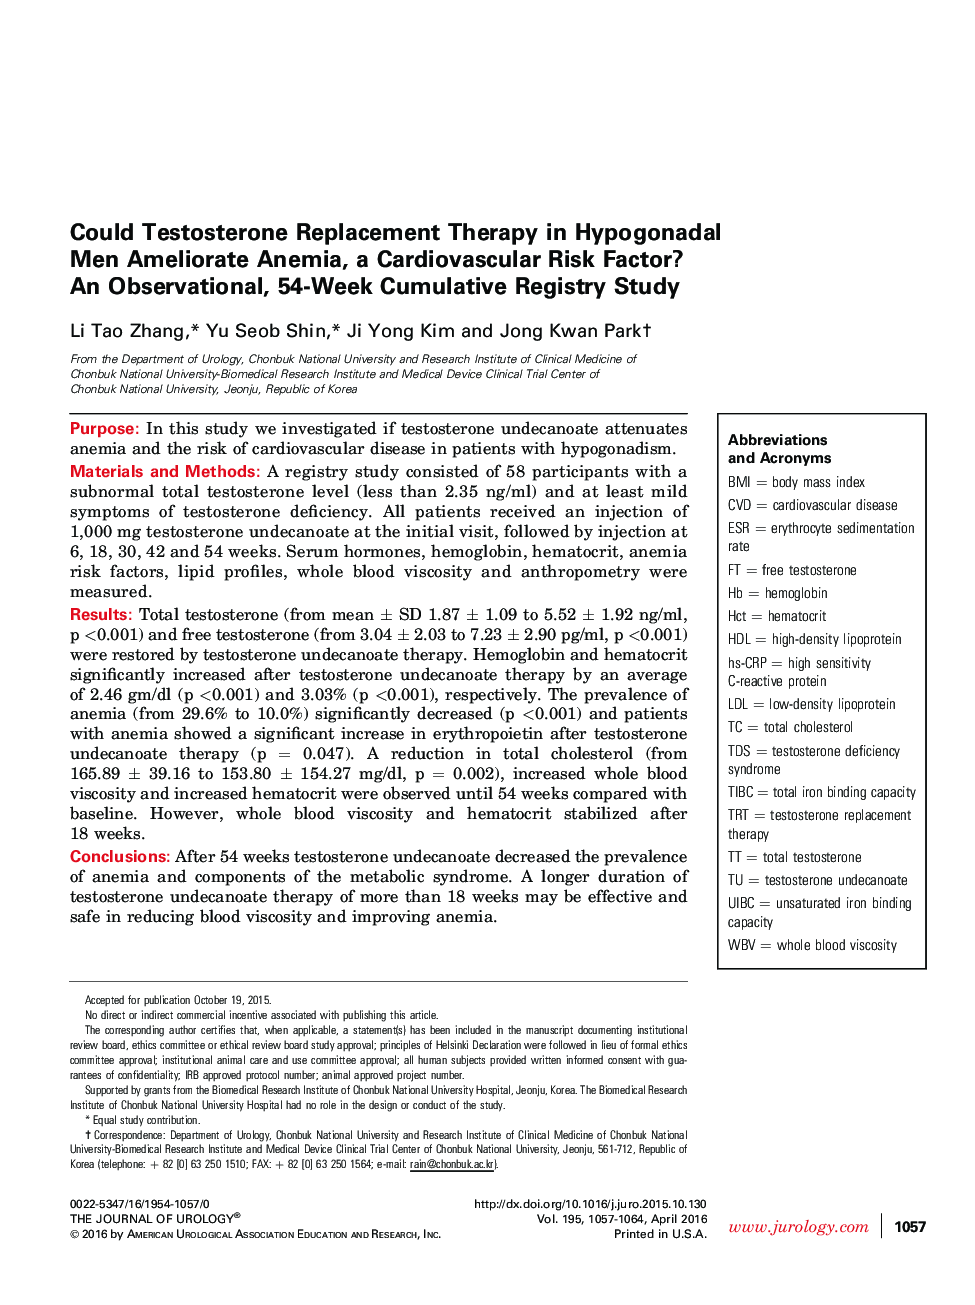 Could Testosterone Replacement Therapy in Hypogonadal Men Ameliorate Anemia, a Cardiovascular Risk Factor? An Observational, 54-Week Cumulative Registry Study 